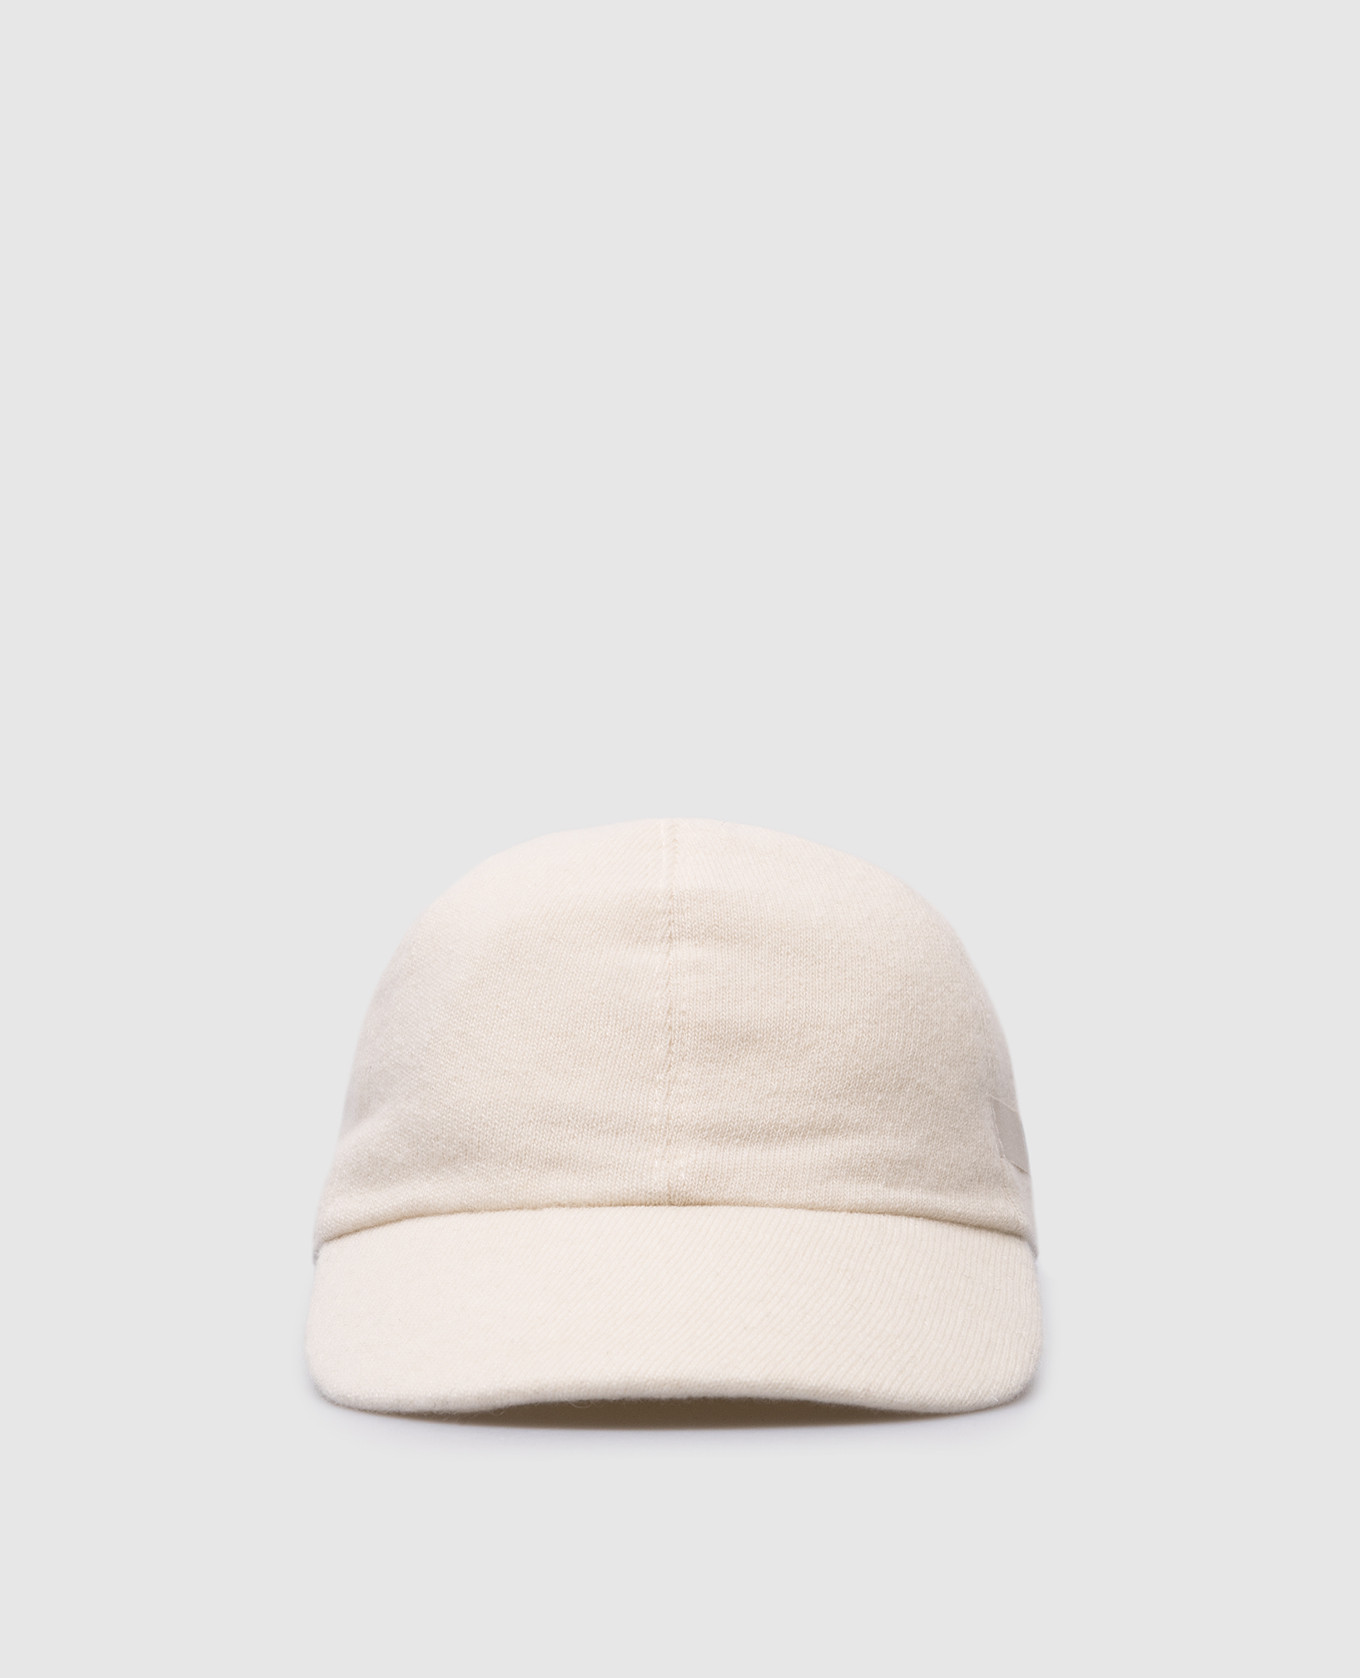 White cashmere cap with logo